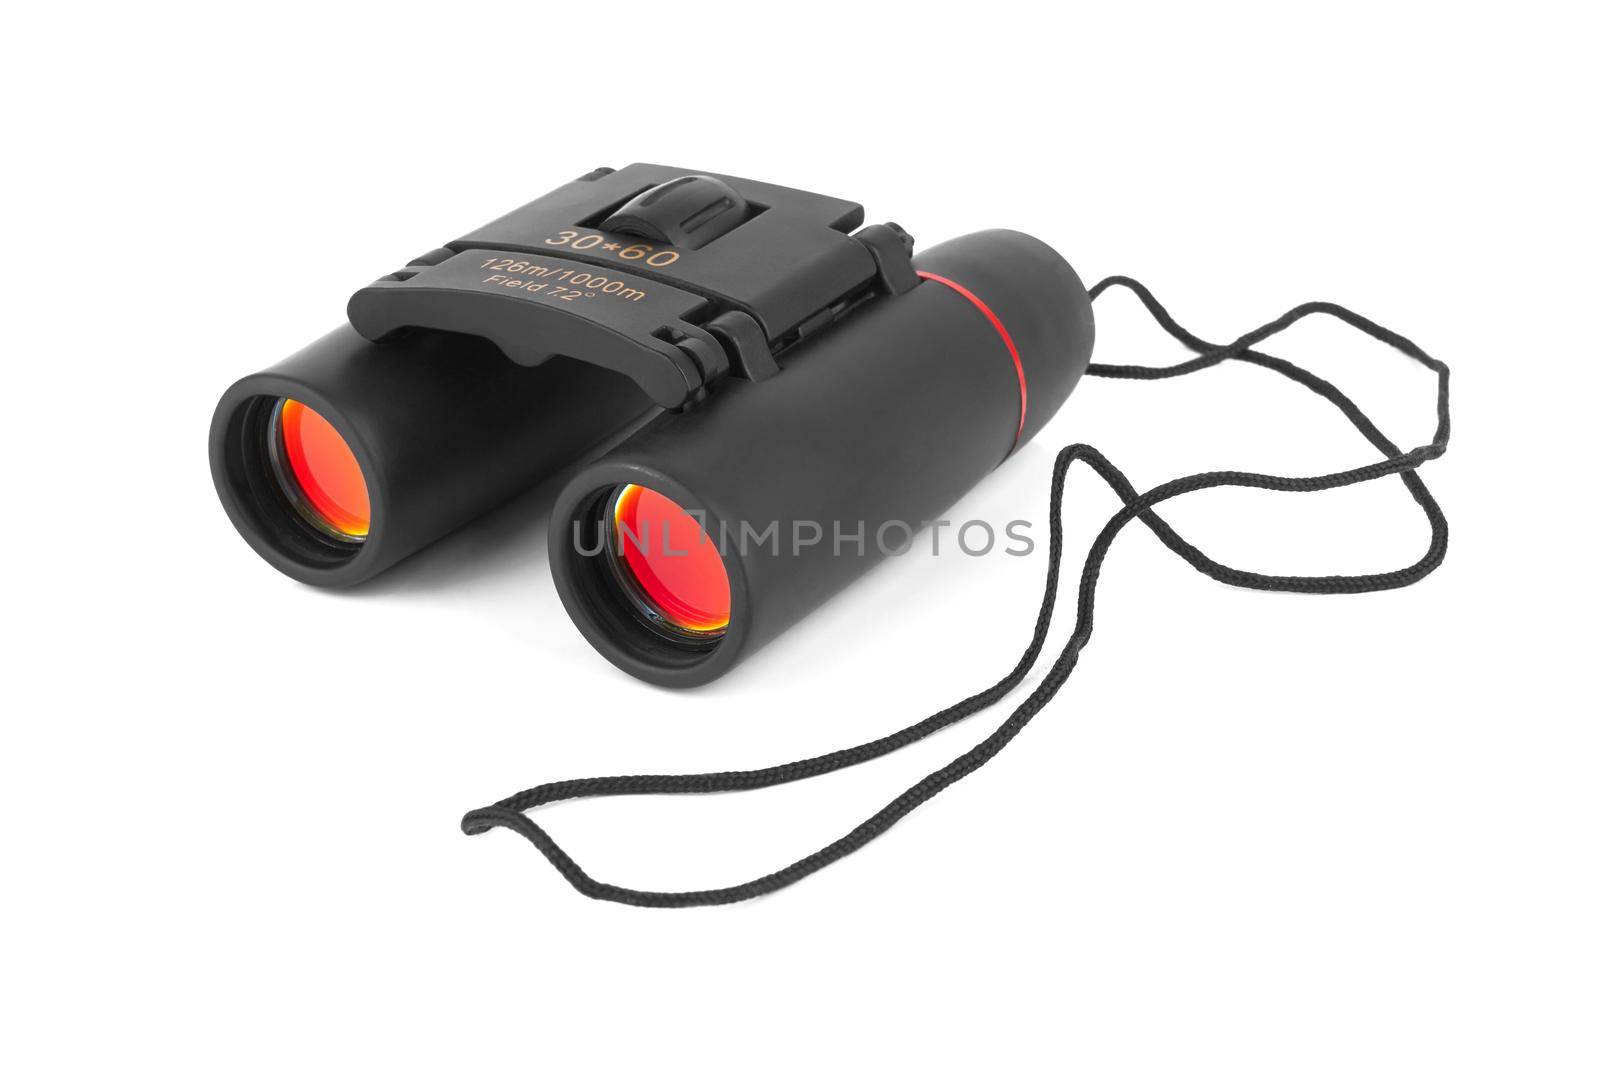 Binocular isolated on a white background